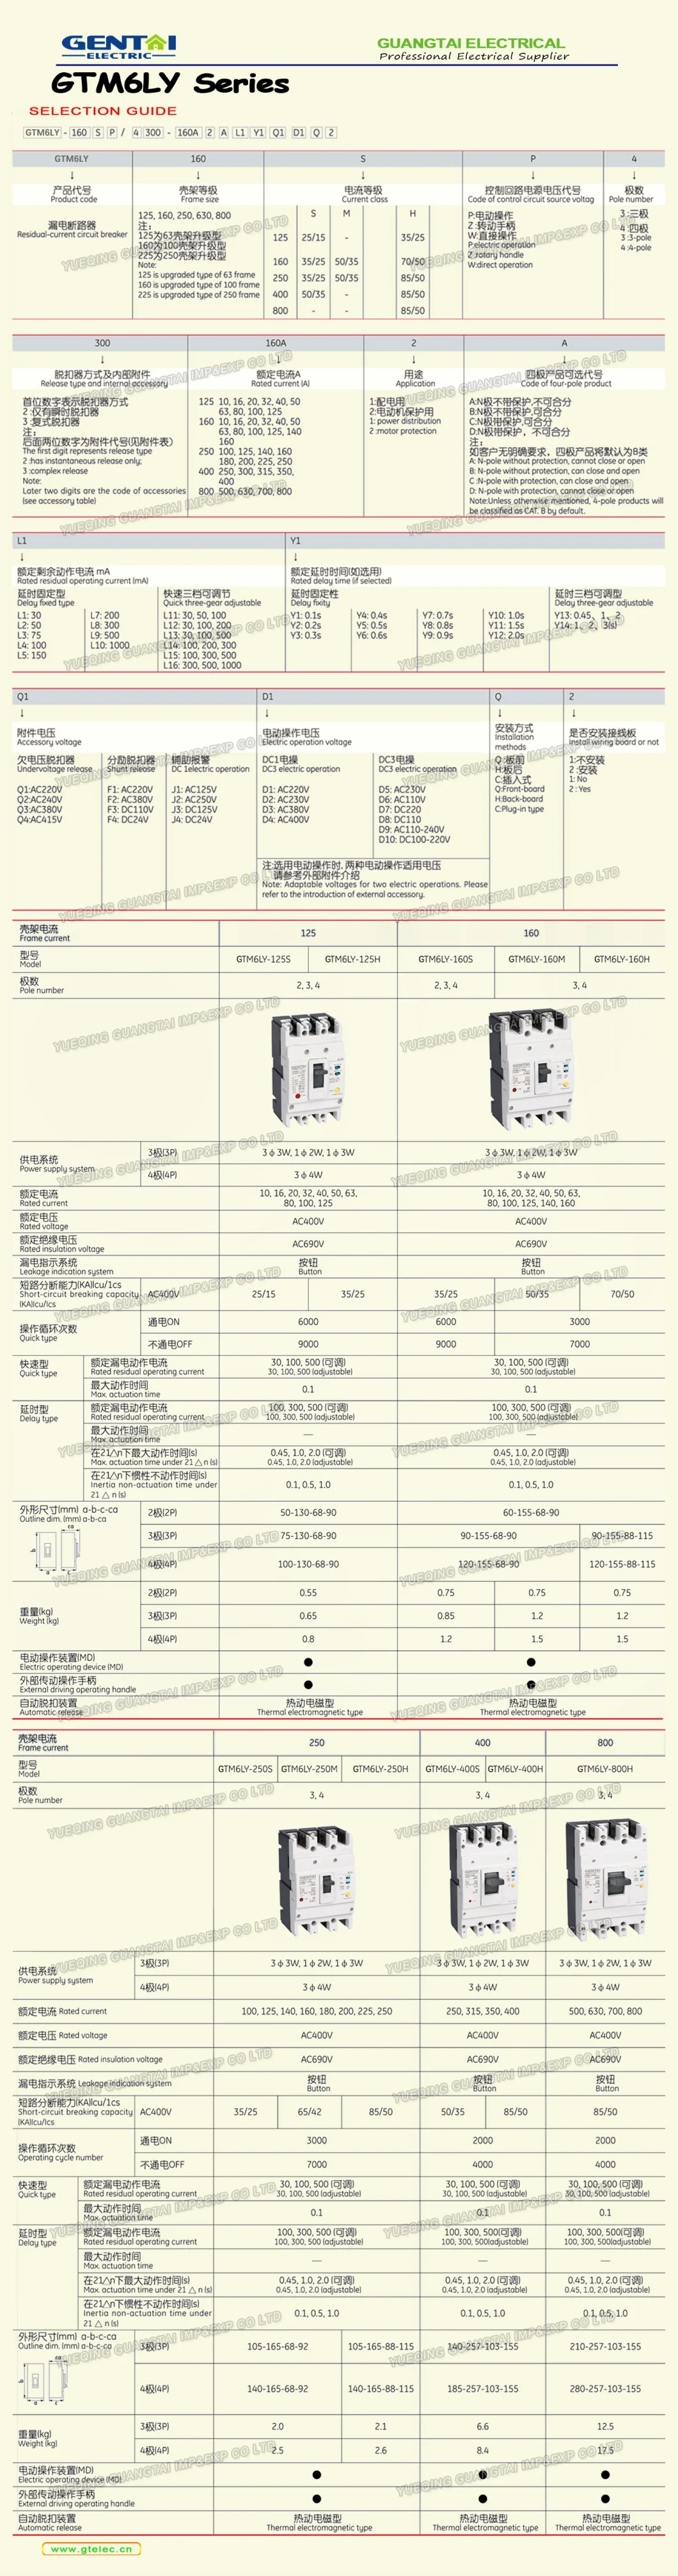 Premium Gtm6rt 3p 4p160A 250A 400A 630A 800A MCCB Thermomagnetic Adjustable Type Moulded Case Circuit Breaker